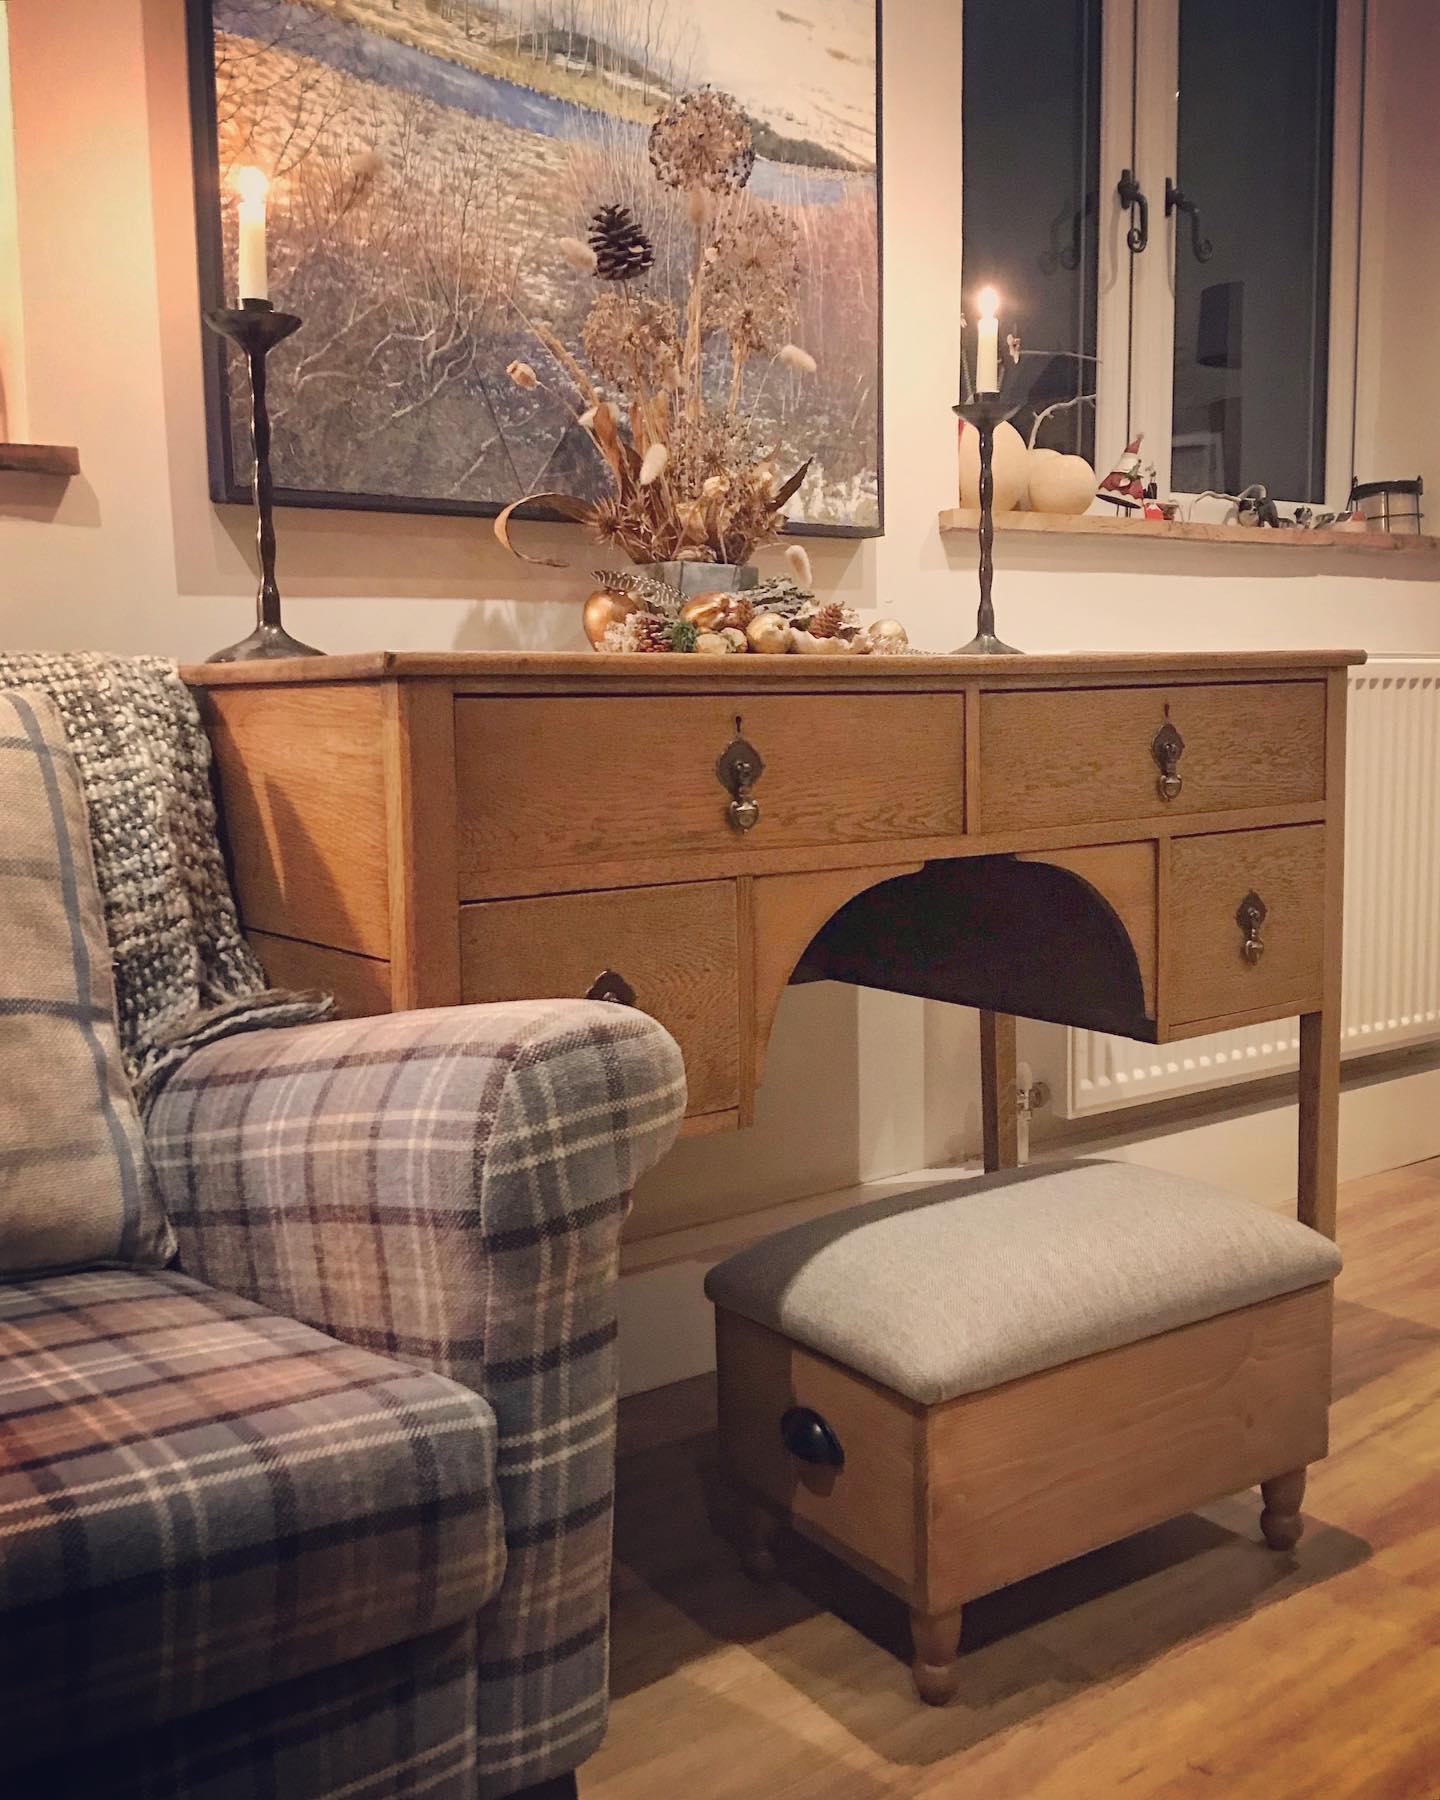 Another lovely spot for one of our bespoke ottomans! After working with the customer to choose a fabric to match the chair, and using the sideboard colour to base the finish on, we’re so pleased to see that it blends in so well with the existing decor! #madetoorder #bespokefurniture #interiordesign #inspo #home #gingerandtweed #craft #oak #tartan #herringbone